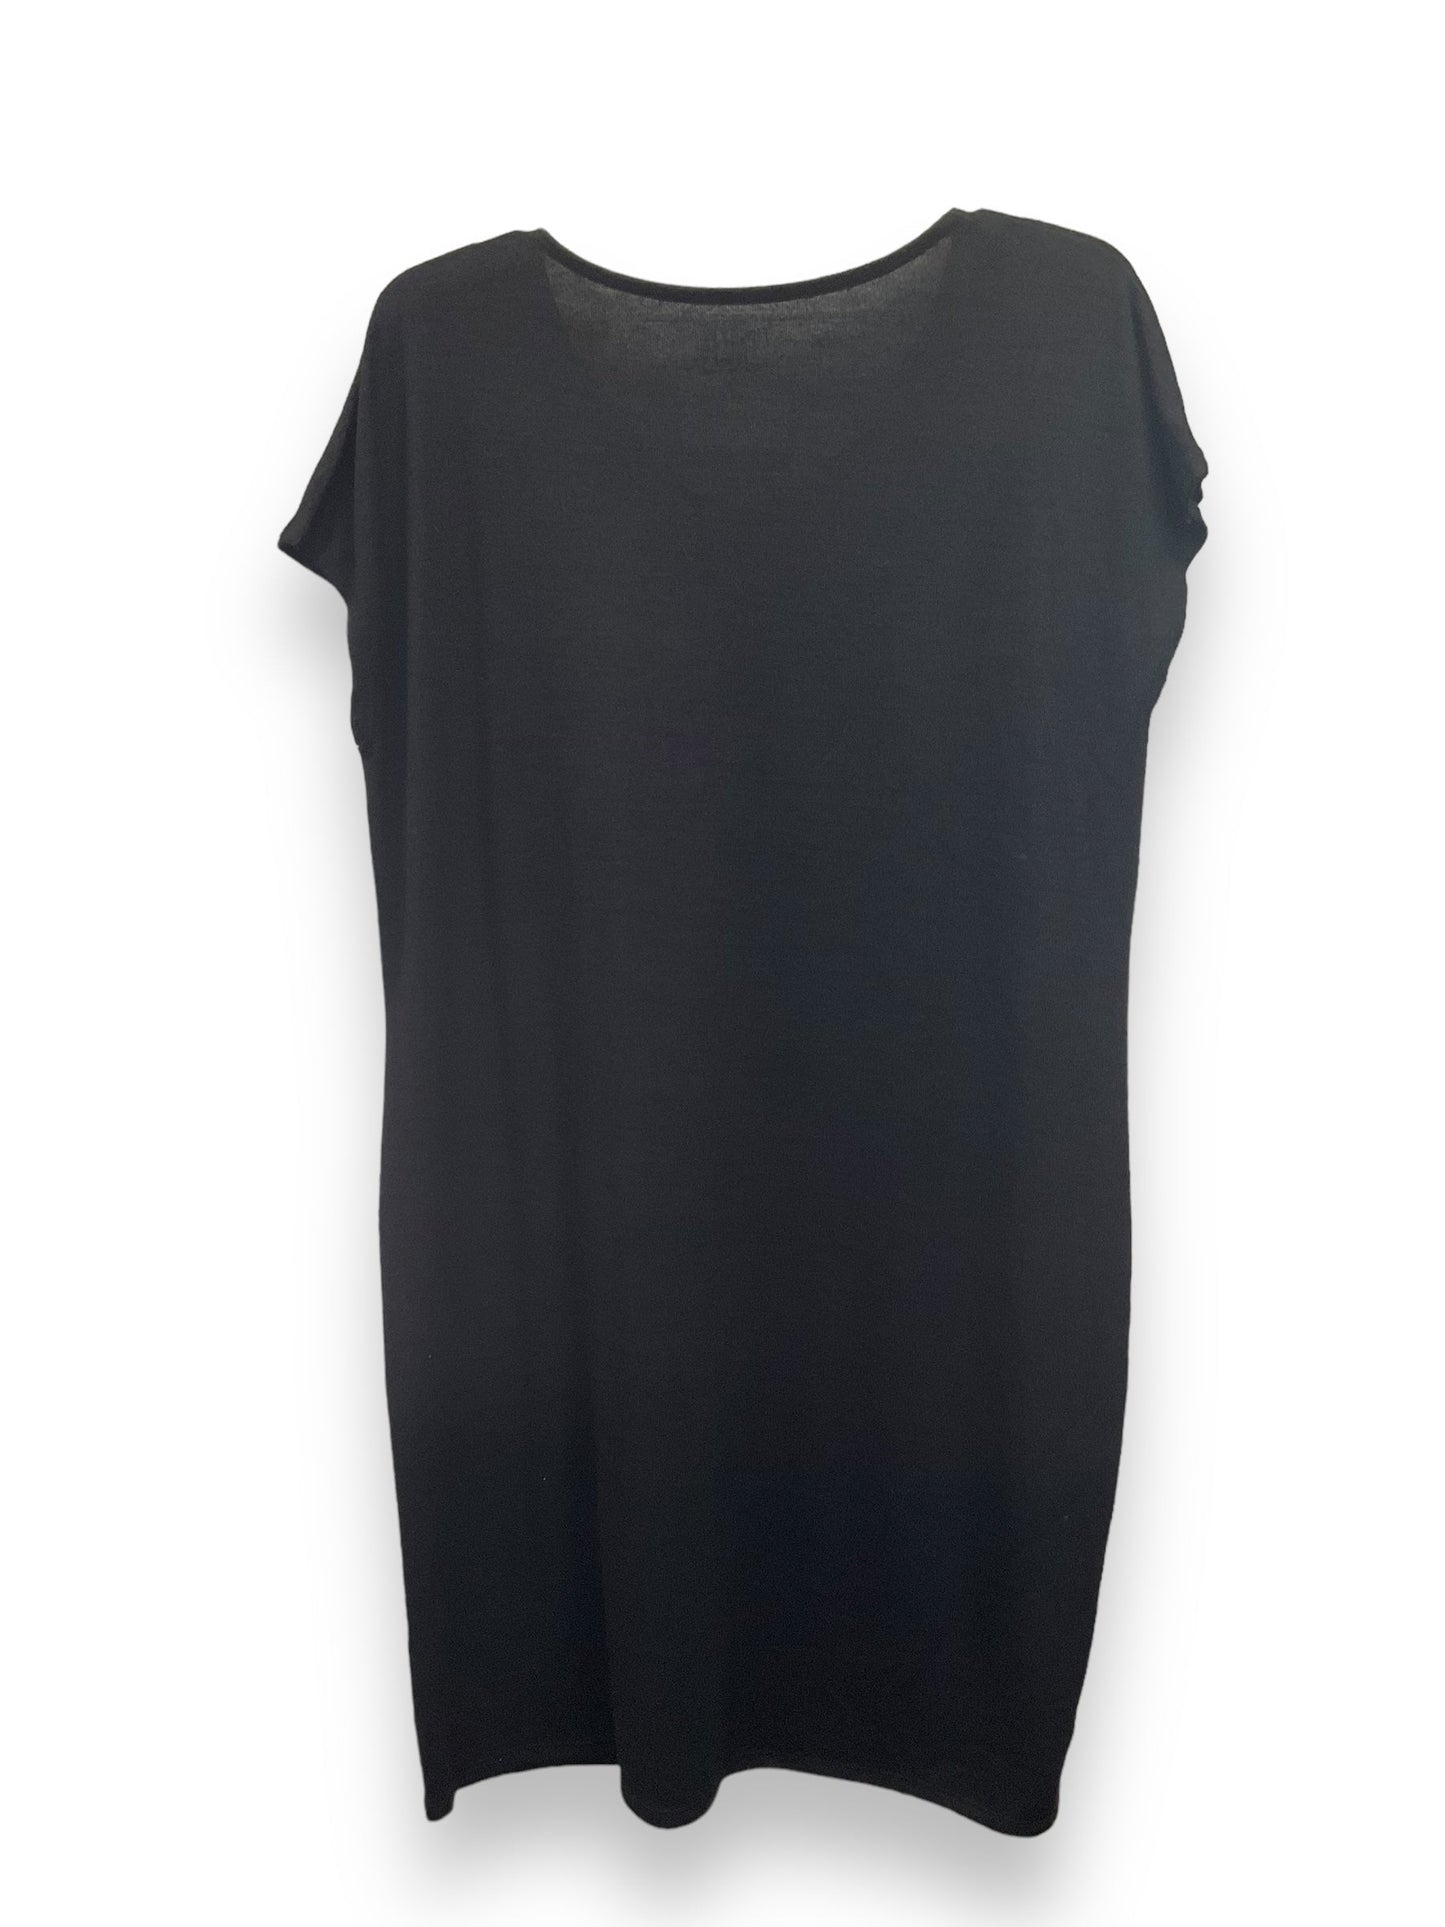 Black Dress Casual Short Time And Tru, Size M